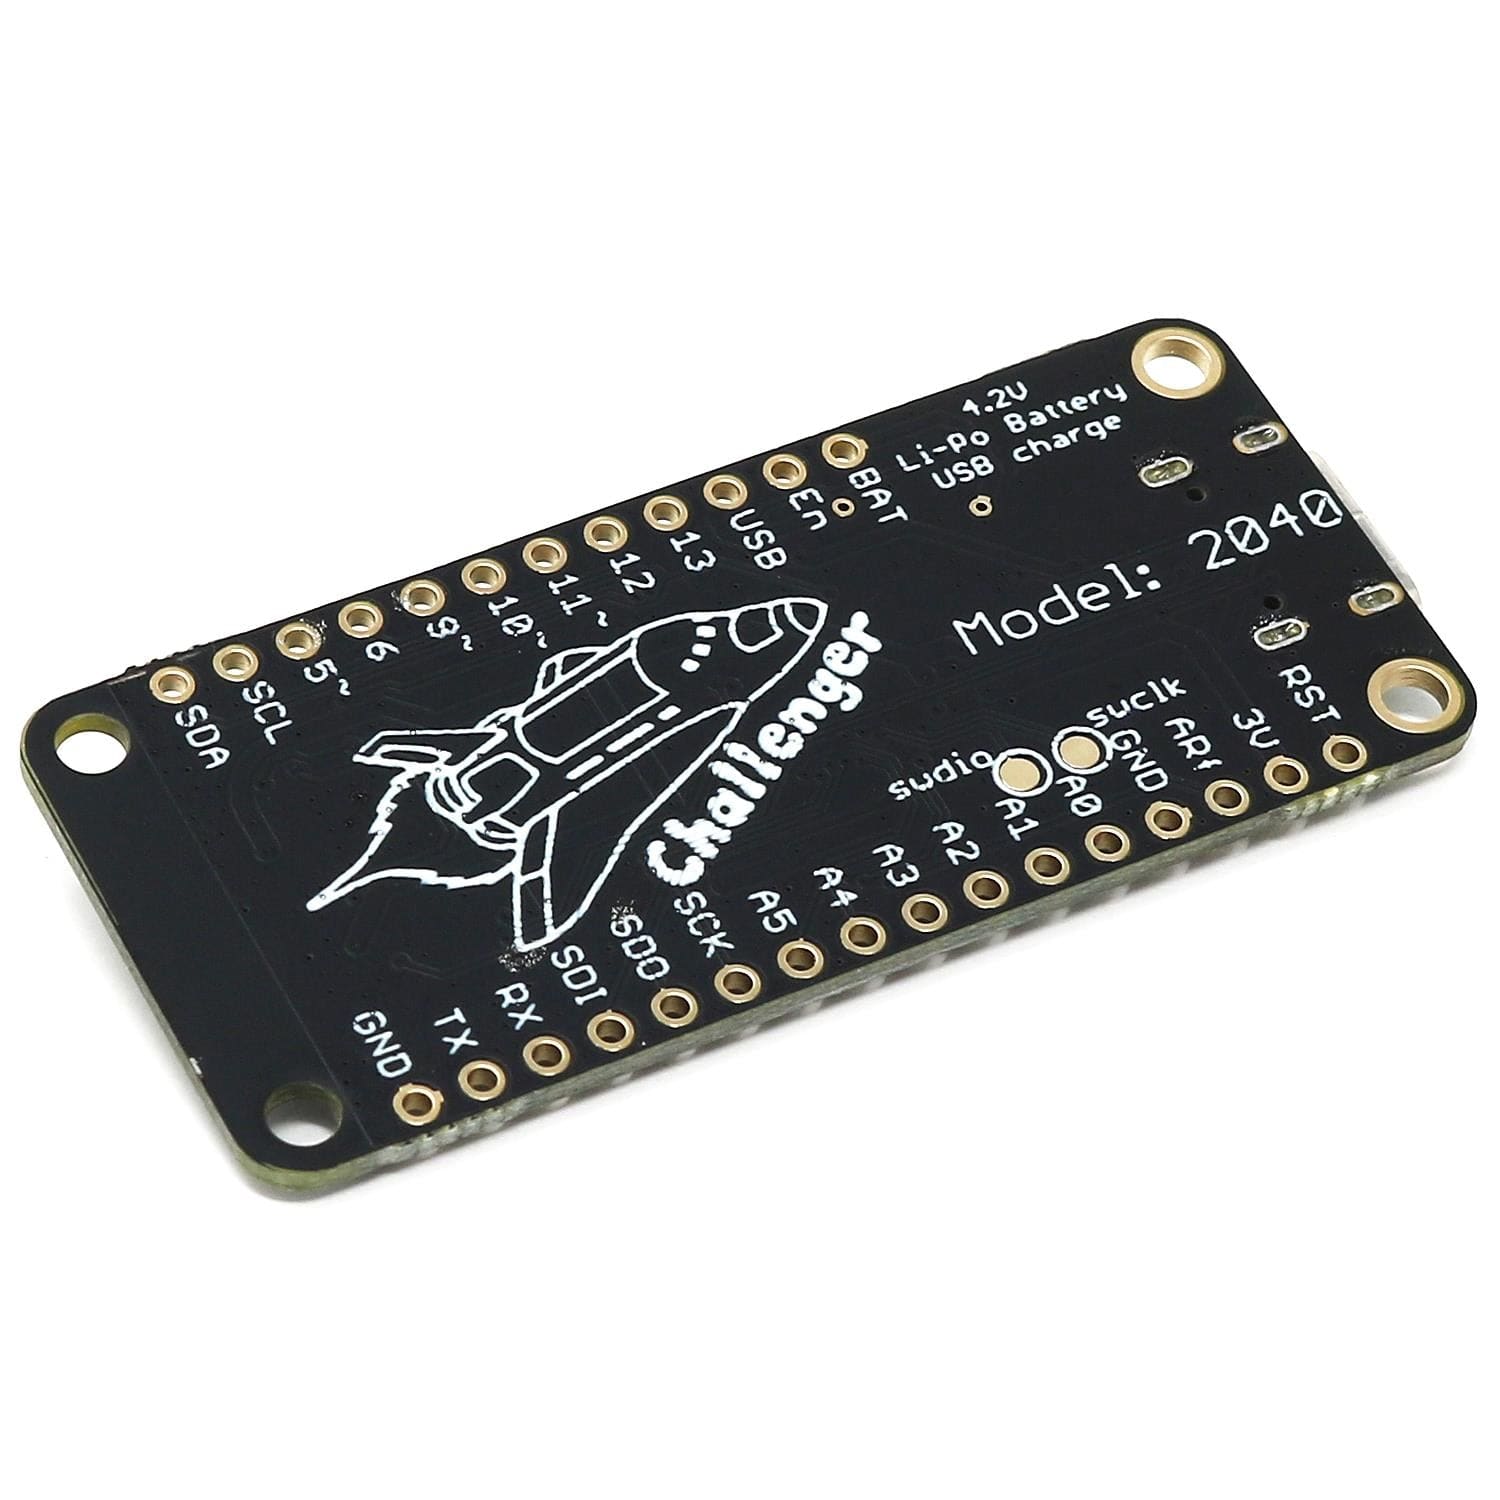 Challenger RP2040 WiFi (Chip Antenna) - The Pi Hut